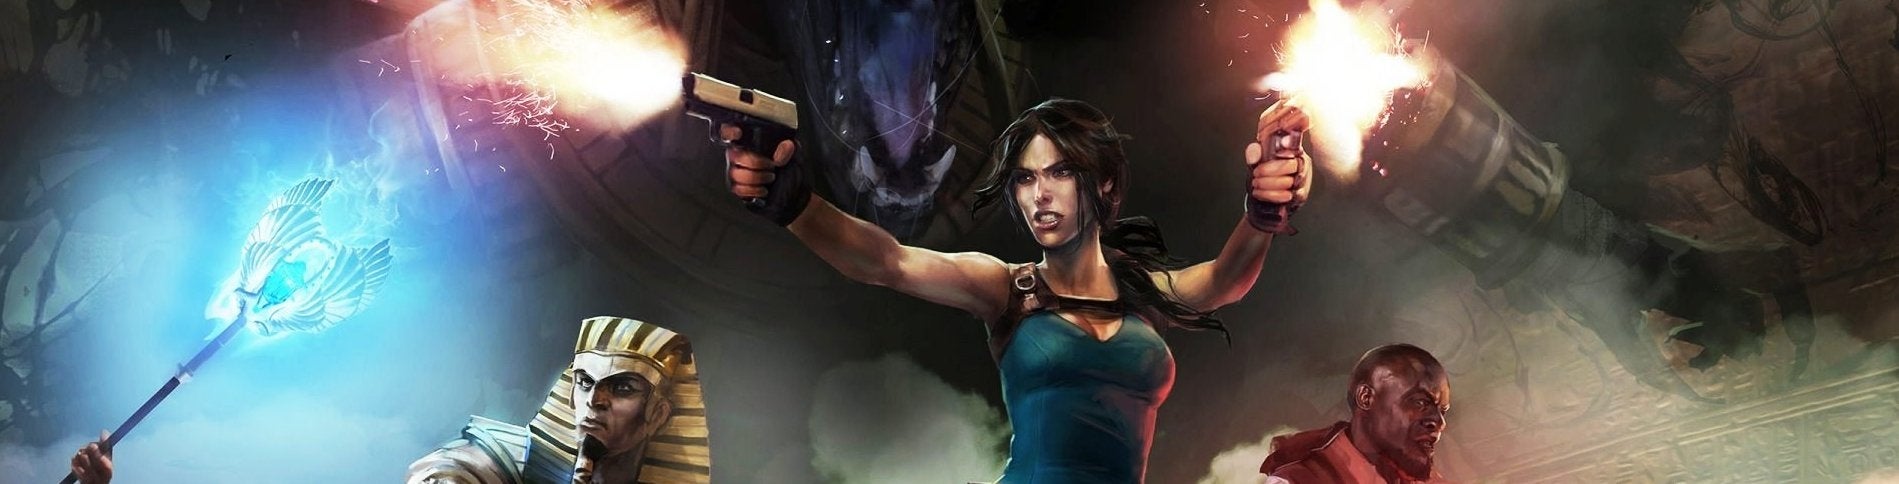 Image for RECENZE Lara Croft and Temple of Osiris